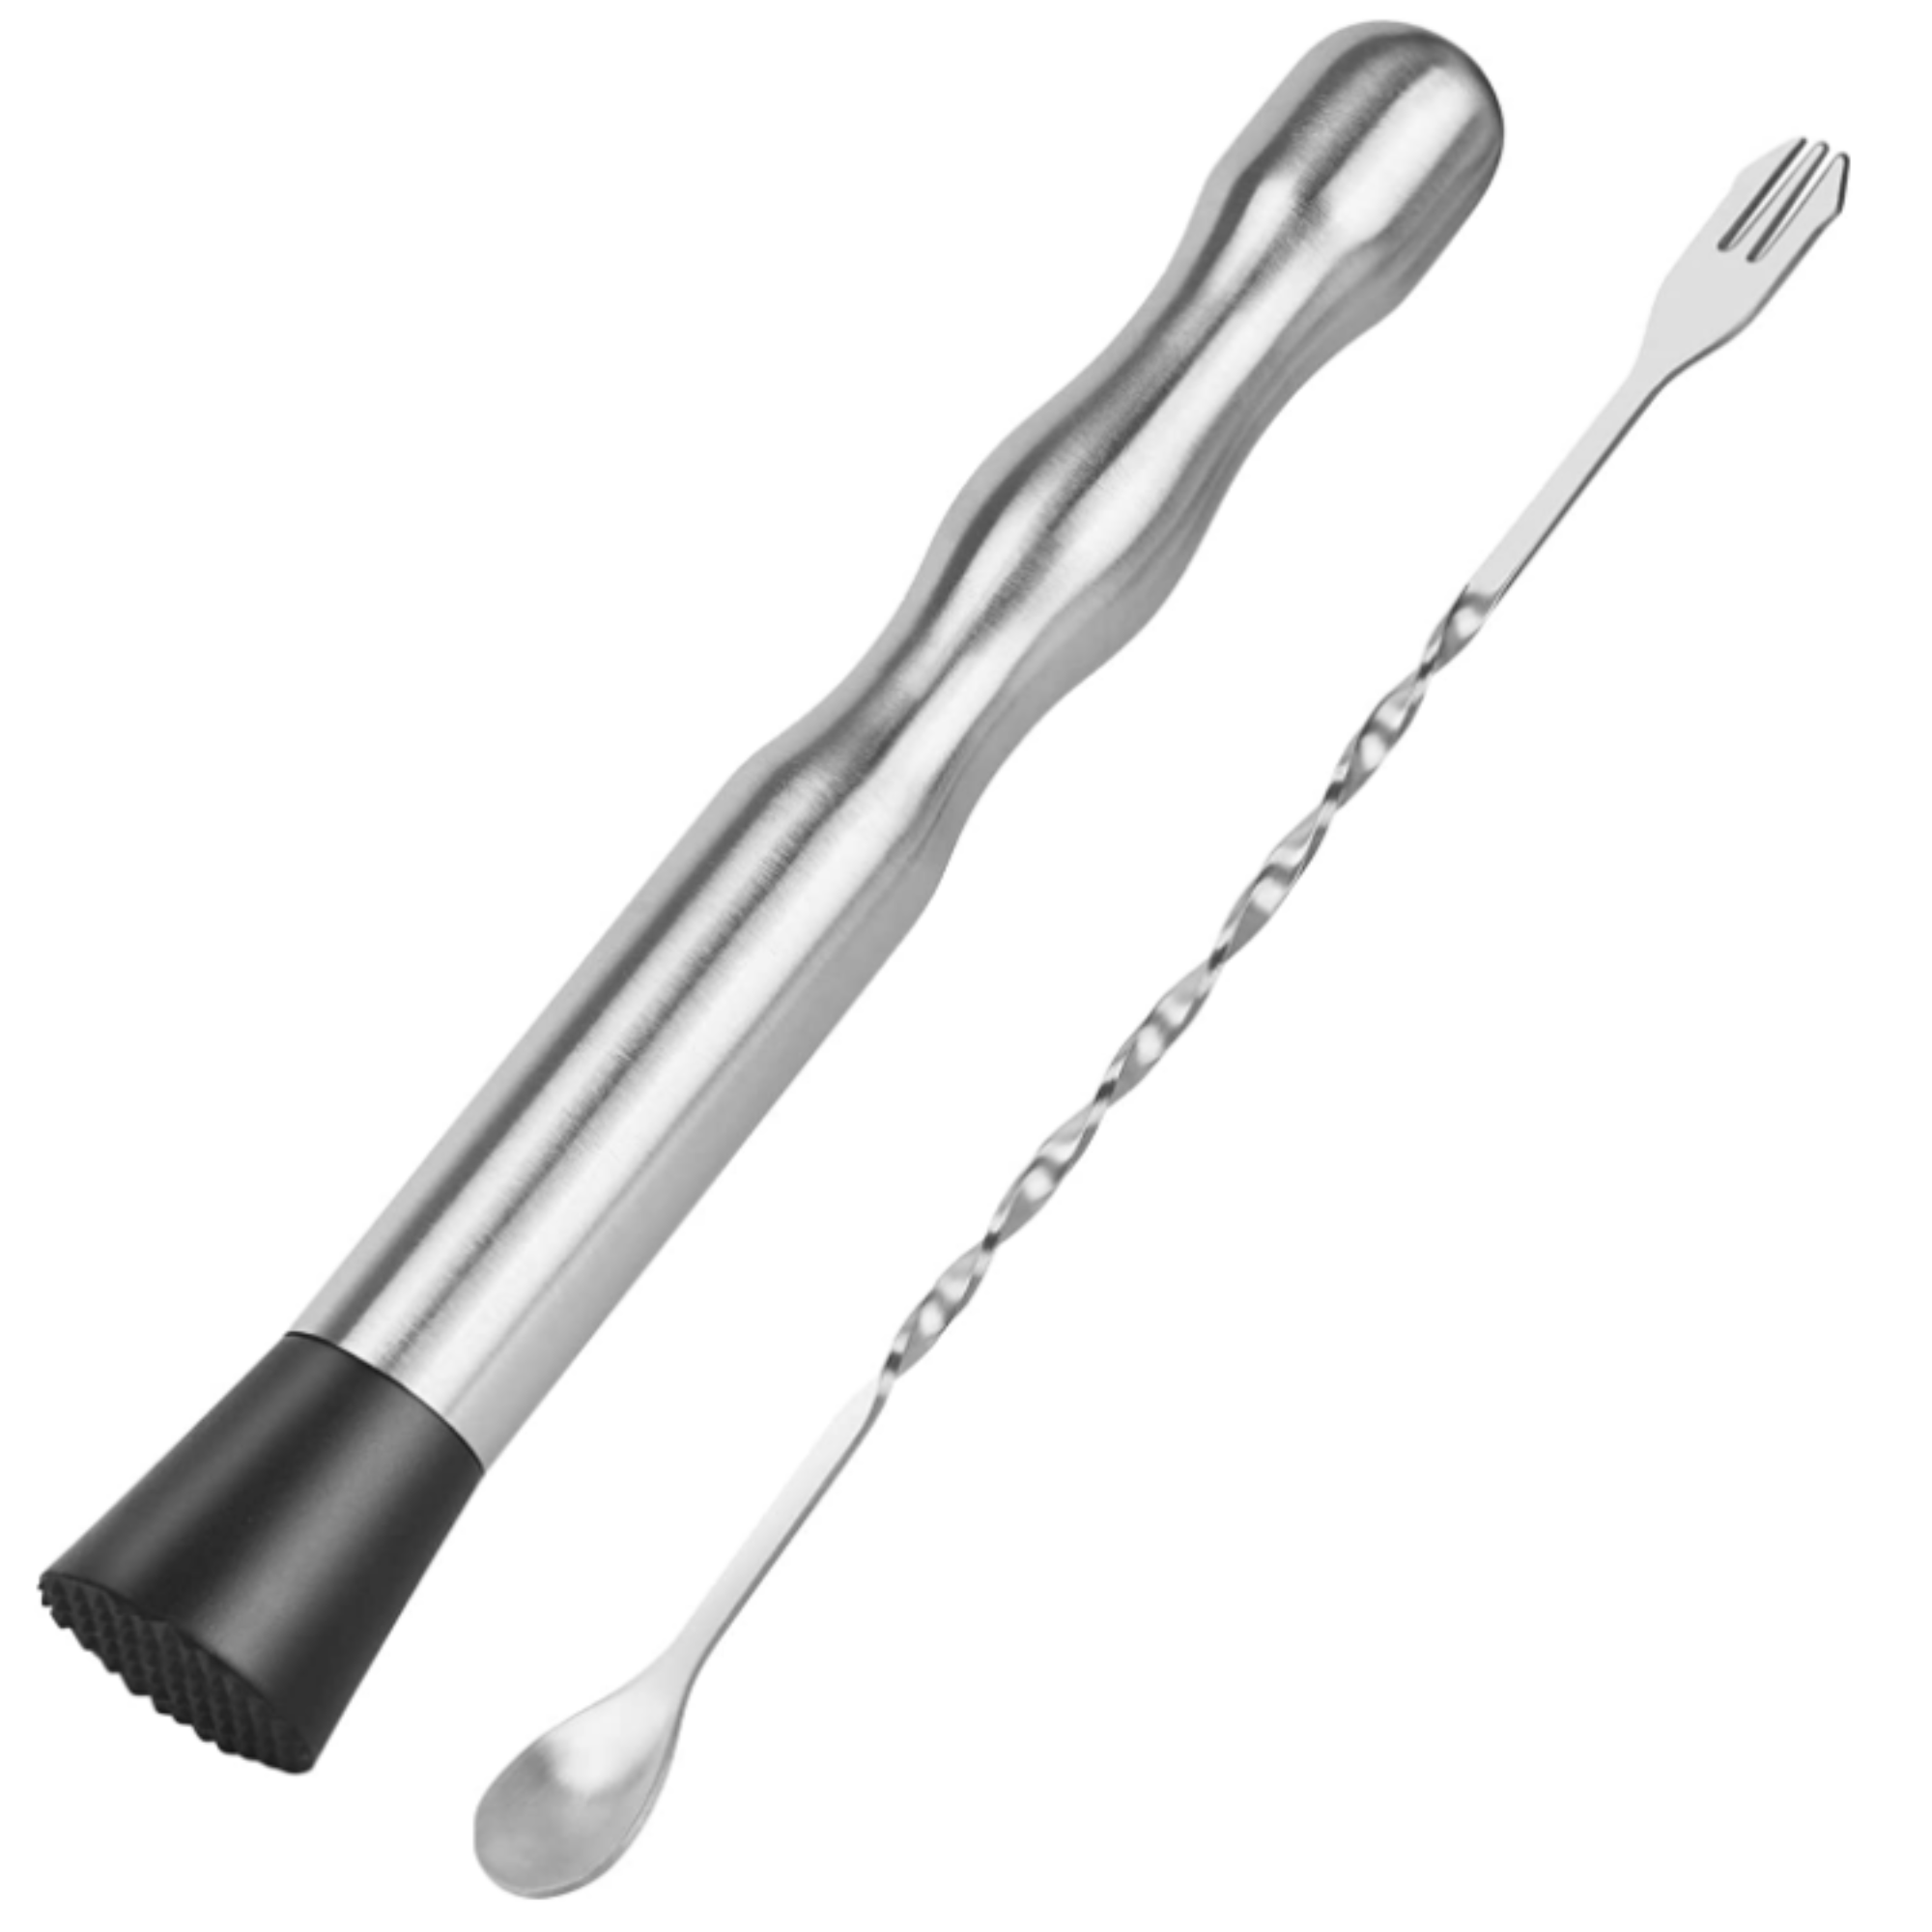 Stainless Steel Cocktail Muddler from Amazon.